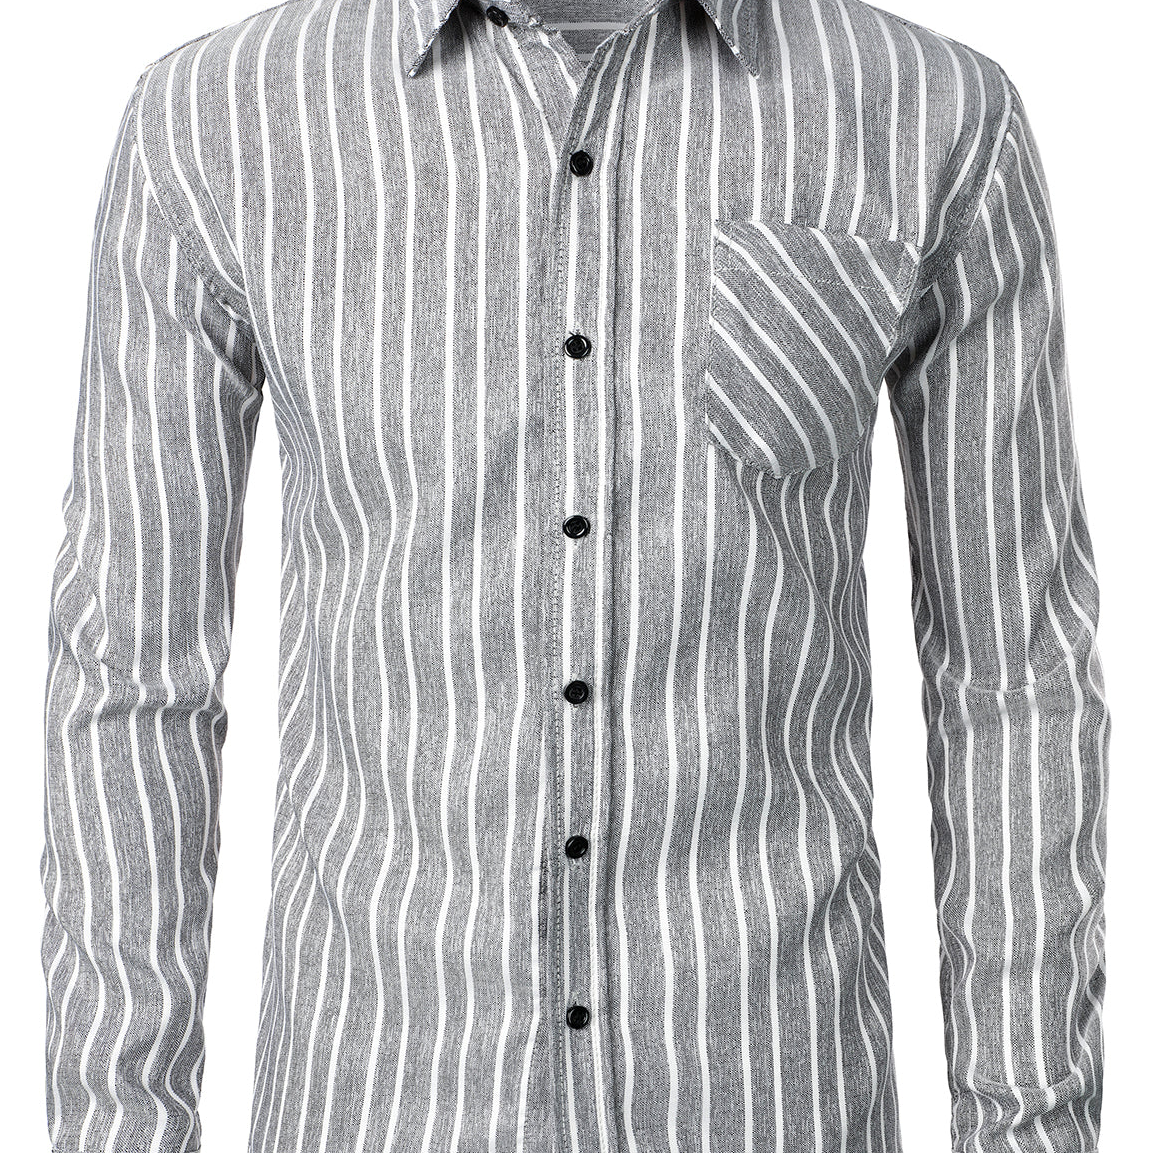 Men's Cotton Long-sleeved Classic Casual Striped Shirt